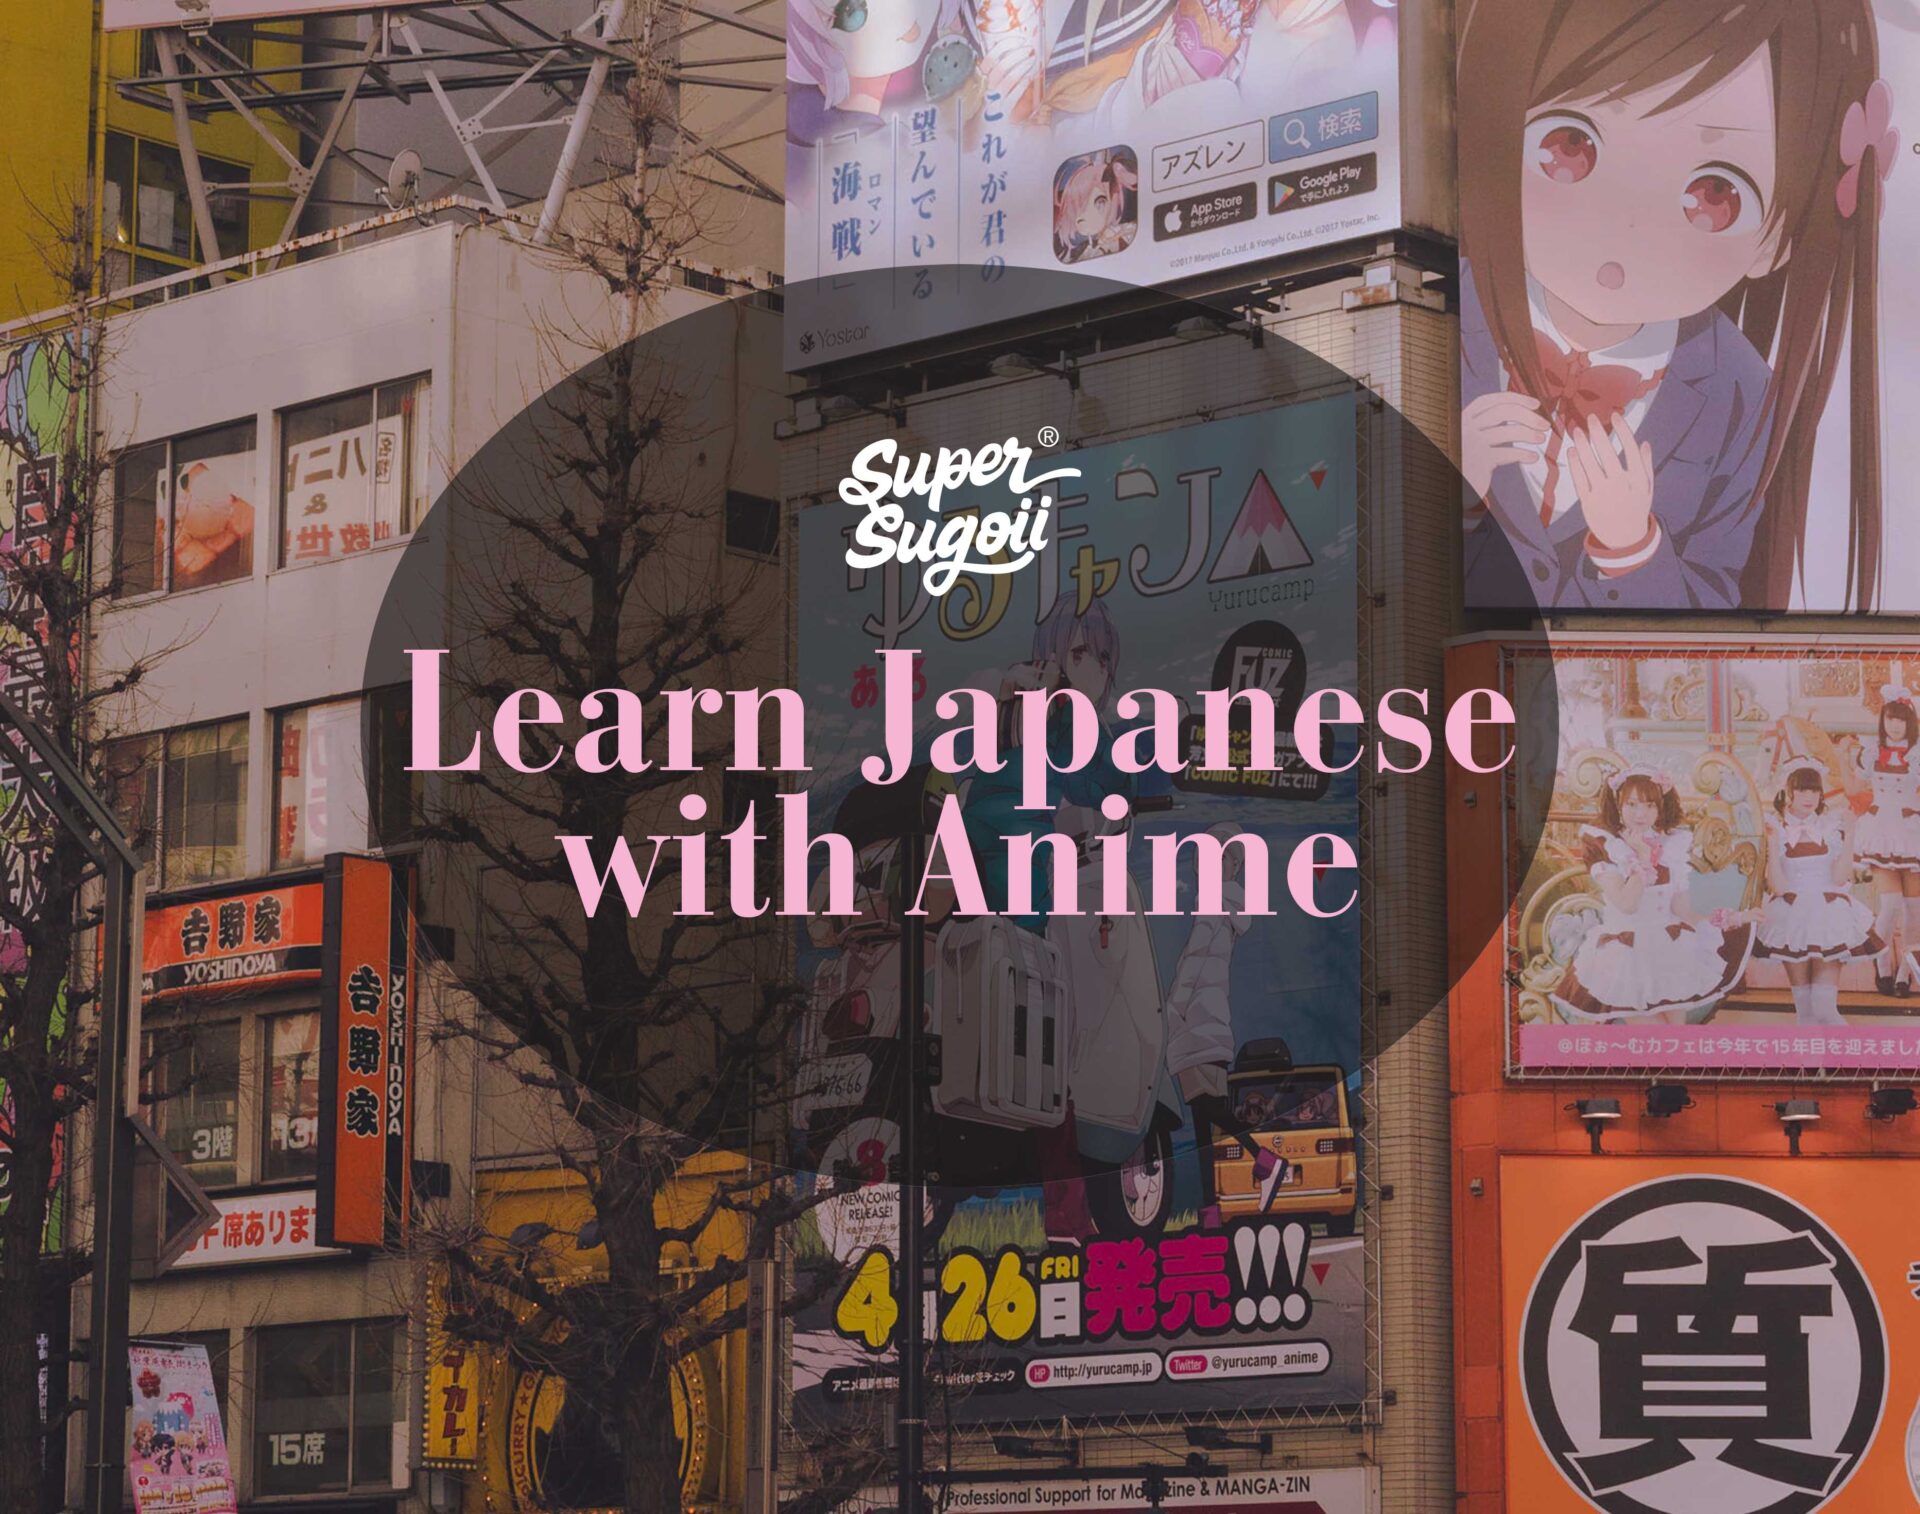 Best Way To Learn Japanese For Anime  lifescienceglobalcom